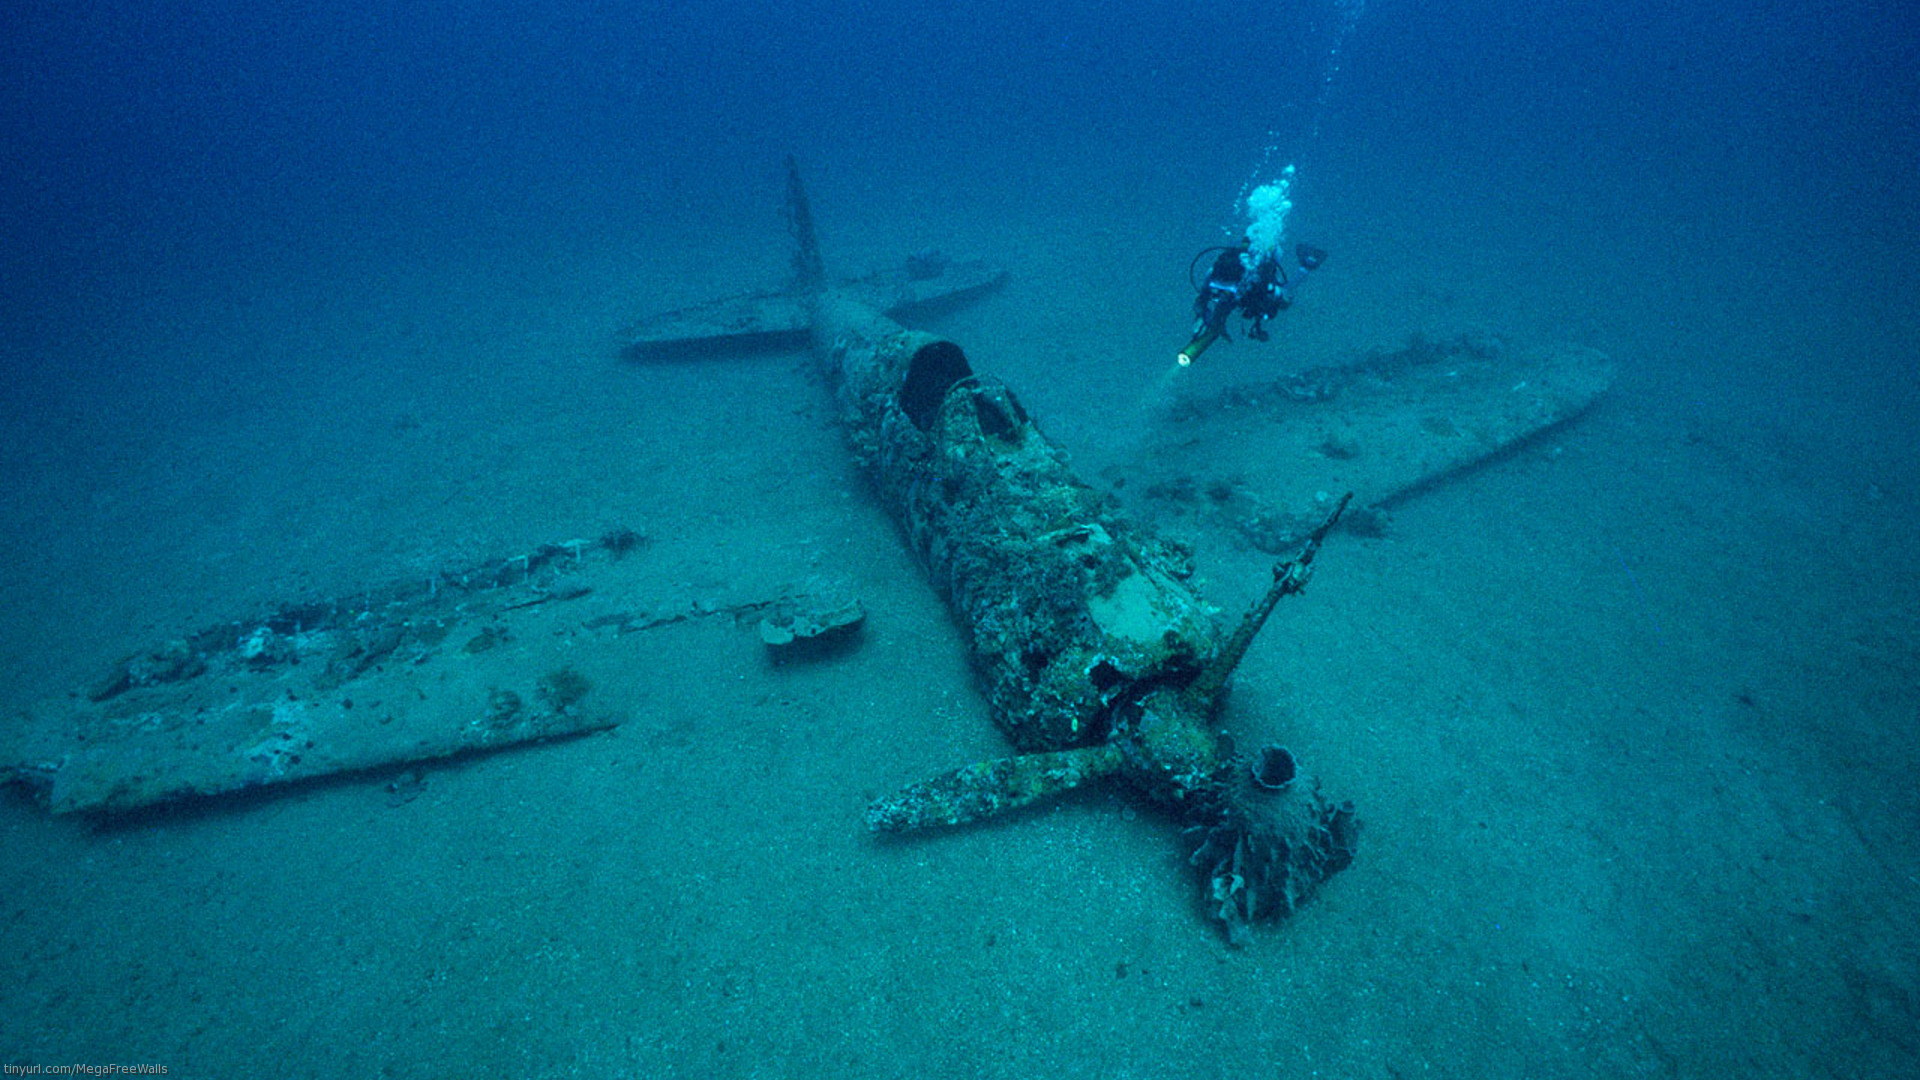 HD desktop wallpaper: Airplane, Diver, Underwater, Aircraft, Military,  Wreck, Vehicles download free picture #535015